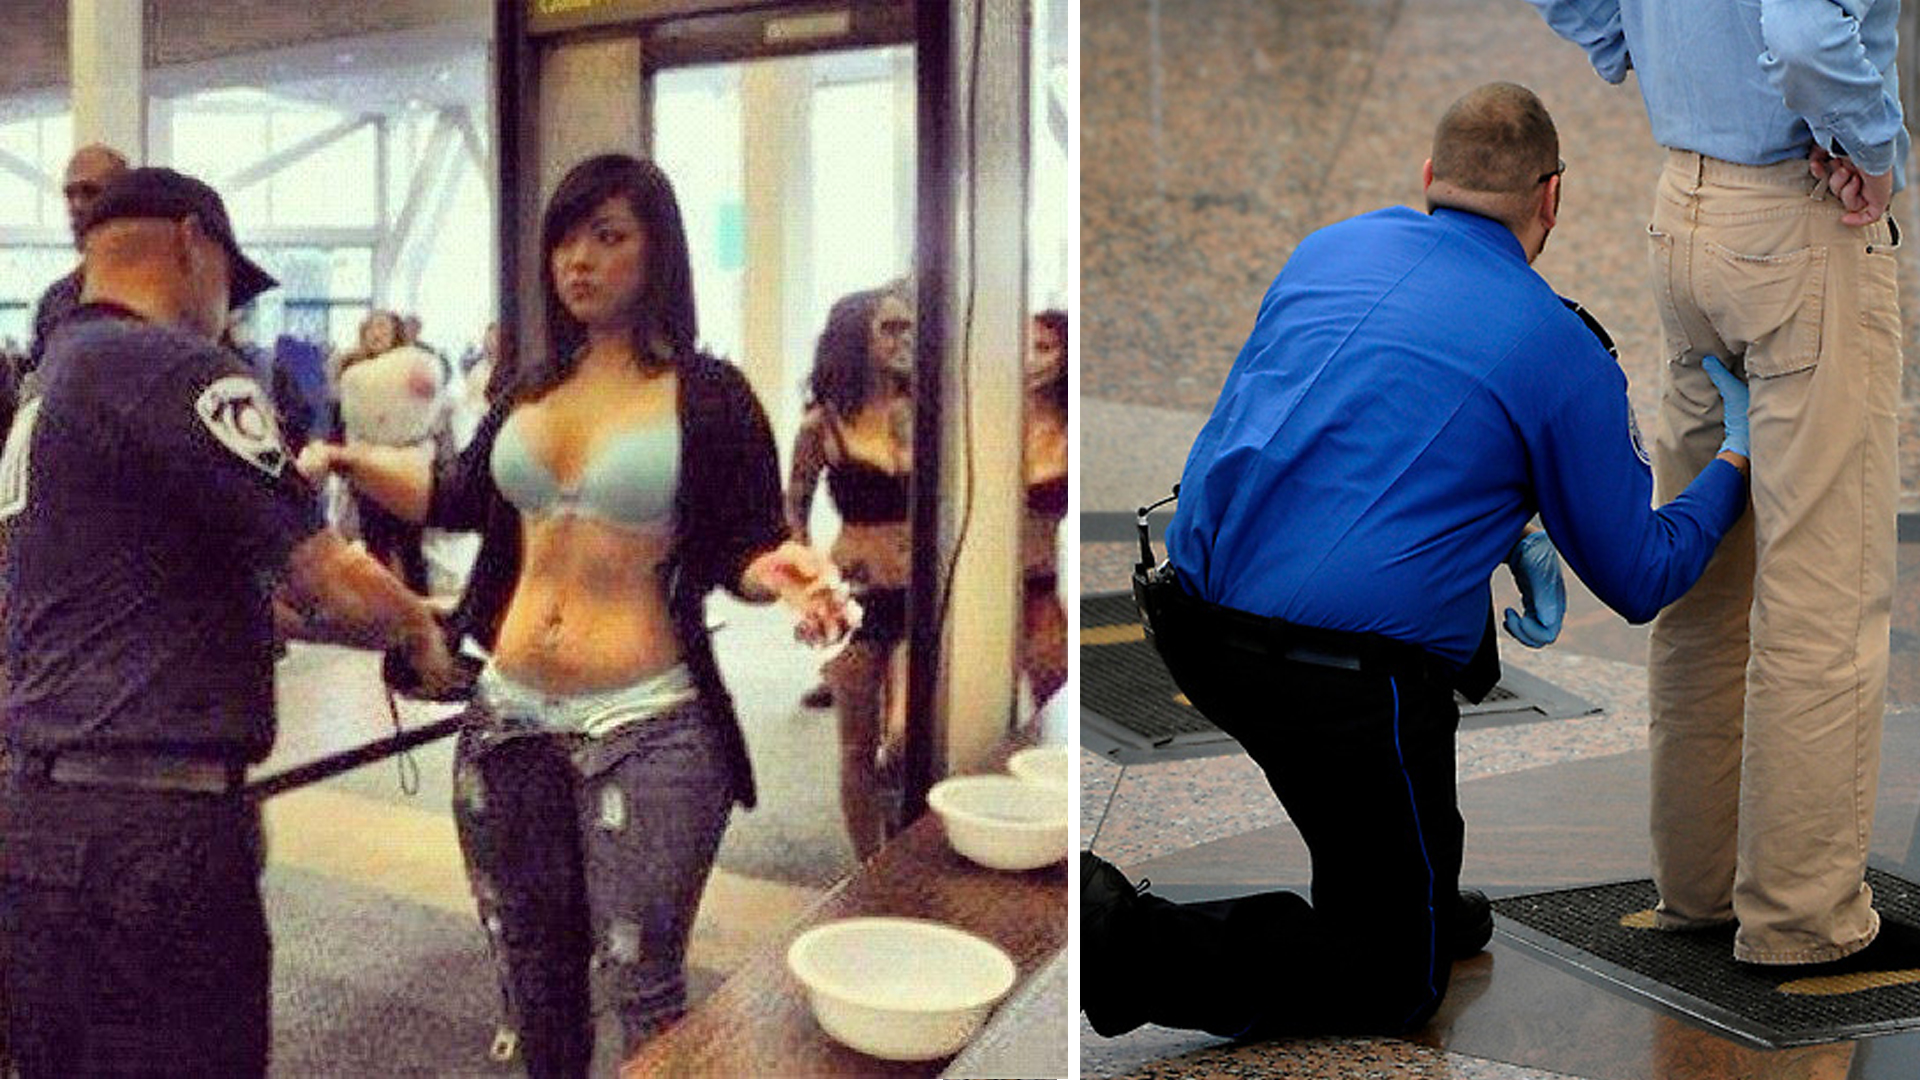 19 Most Embarrassing Airport Security Check Pictures - Men's Den.